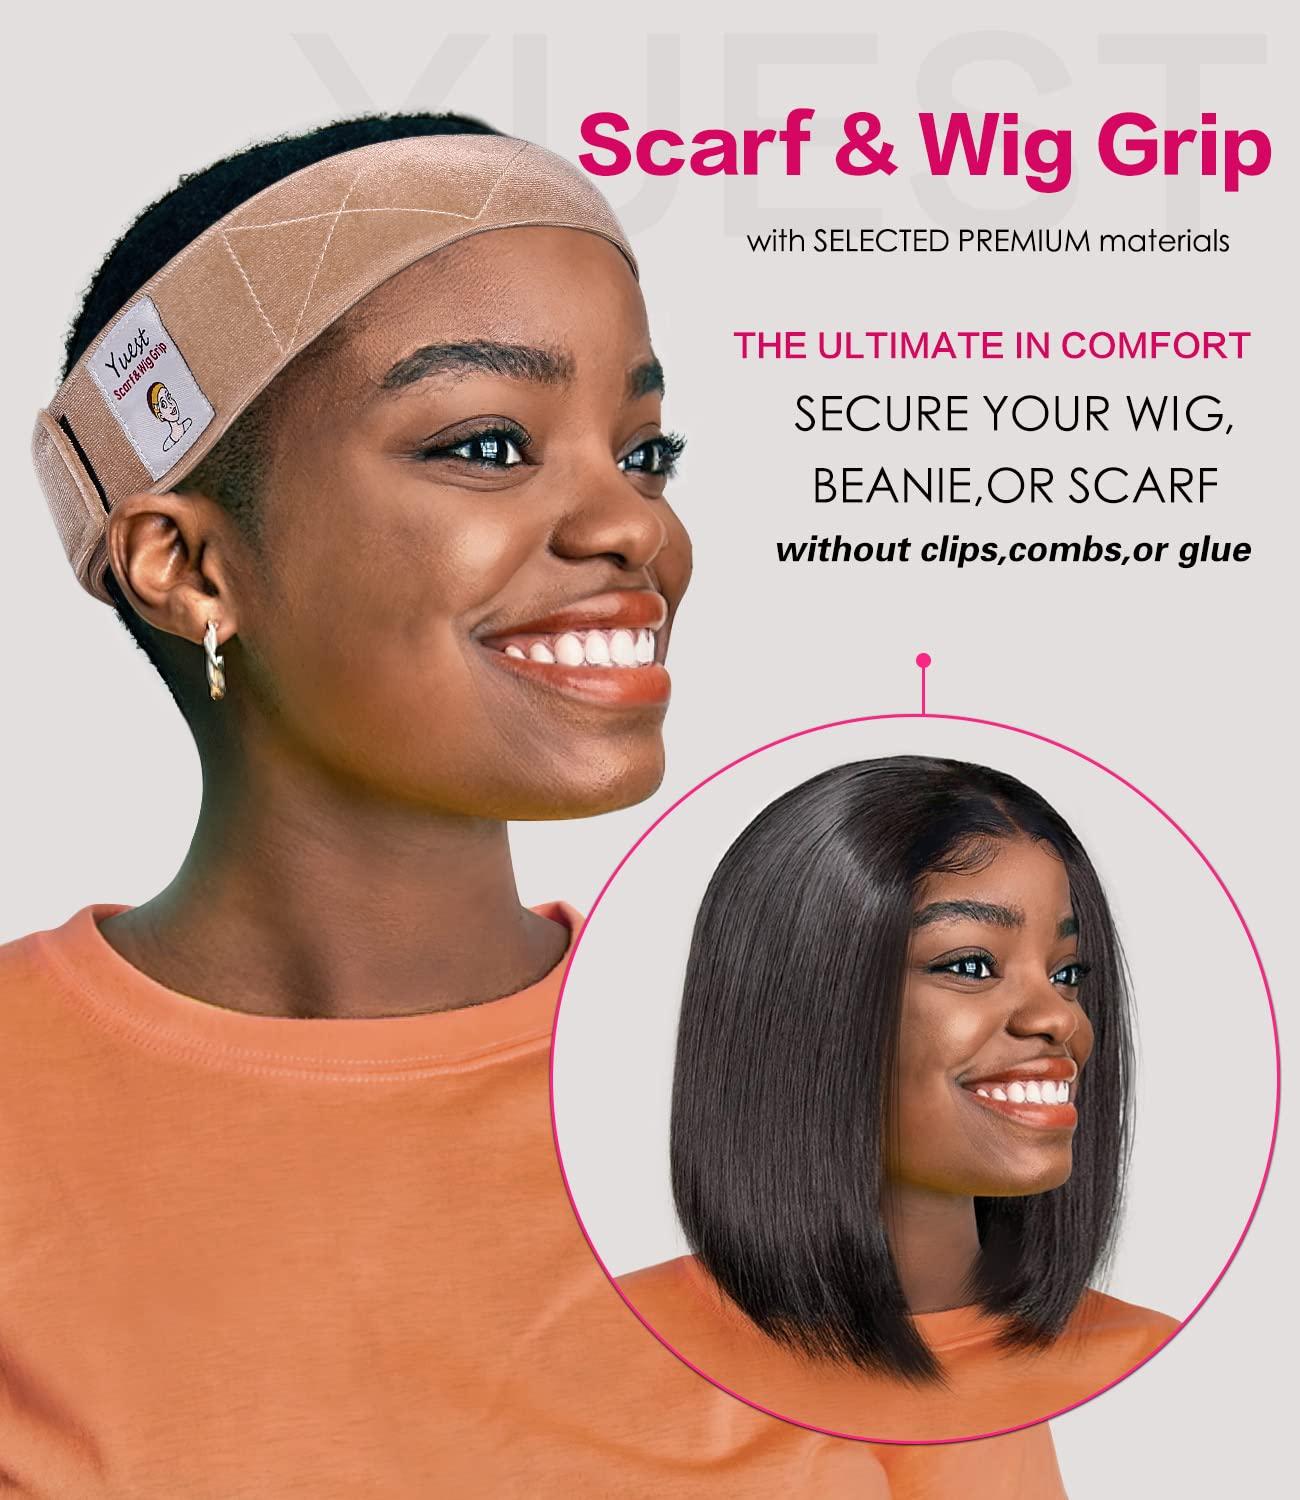 Yuest Wig Grip for Keeping Wigs in Place Wigs Grip band for Lace Front No  Slip Wig Gripper Bands Accessories for Women Wig